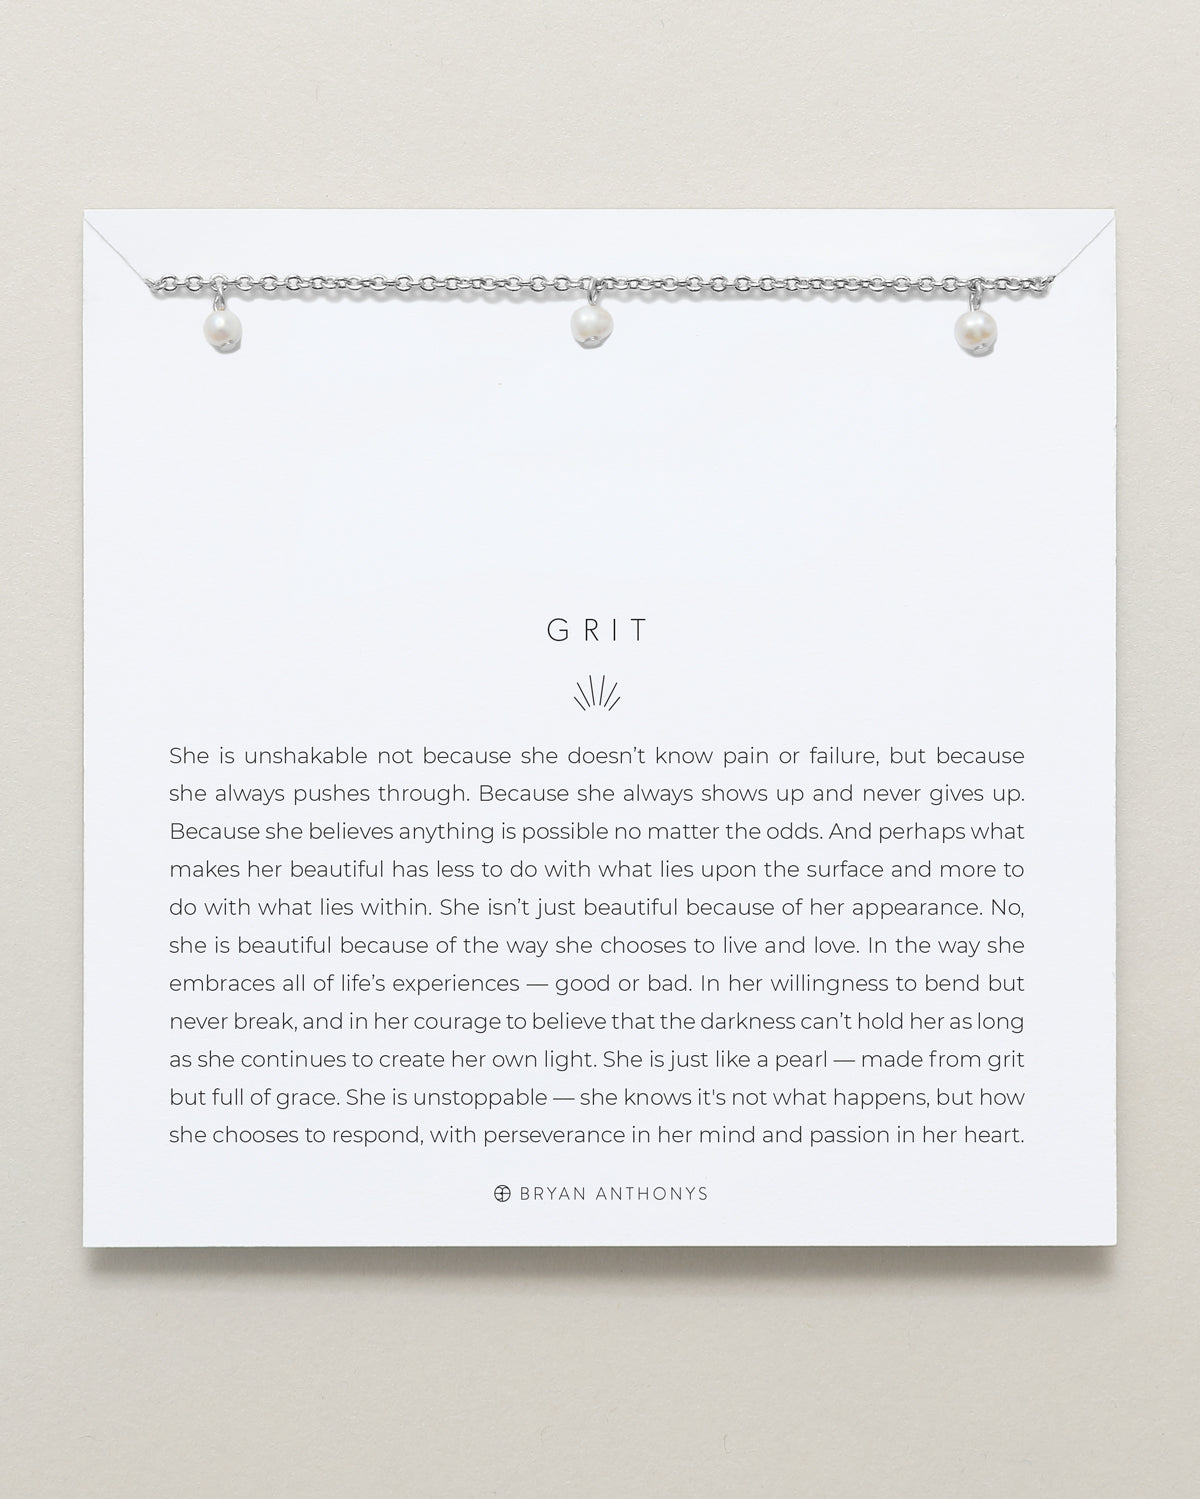 Bryan Anthonys Grit Silver Choker Necklace On Card